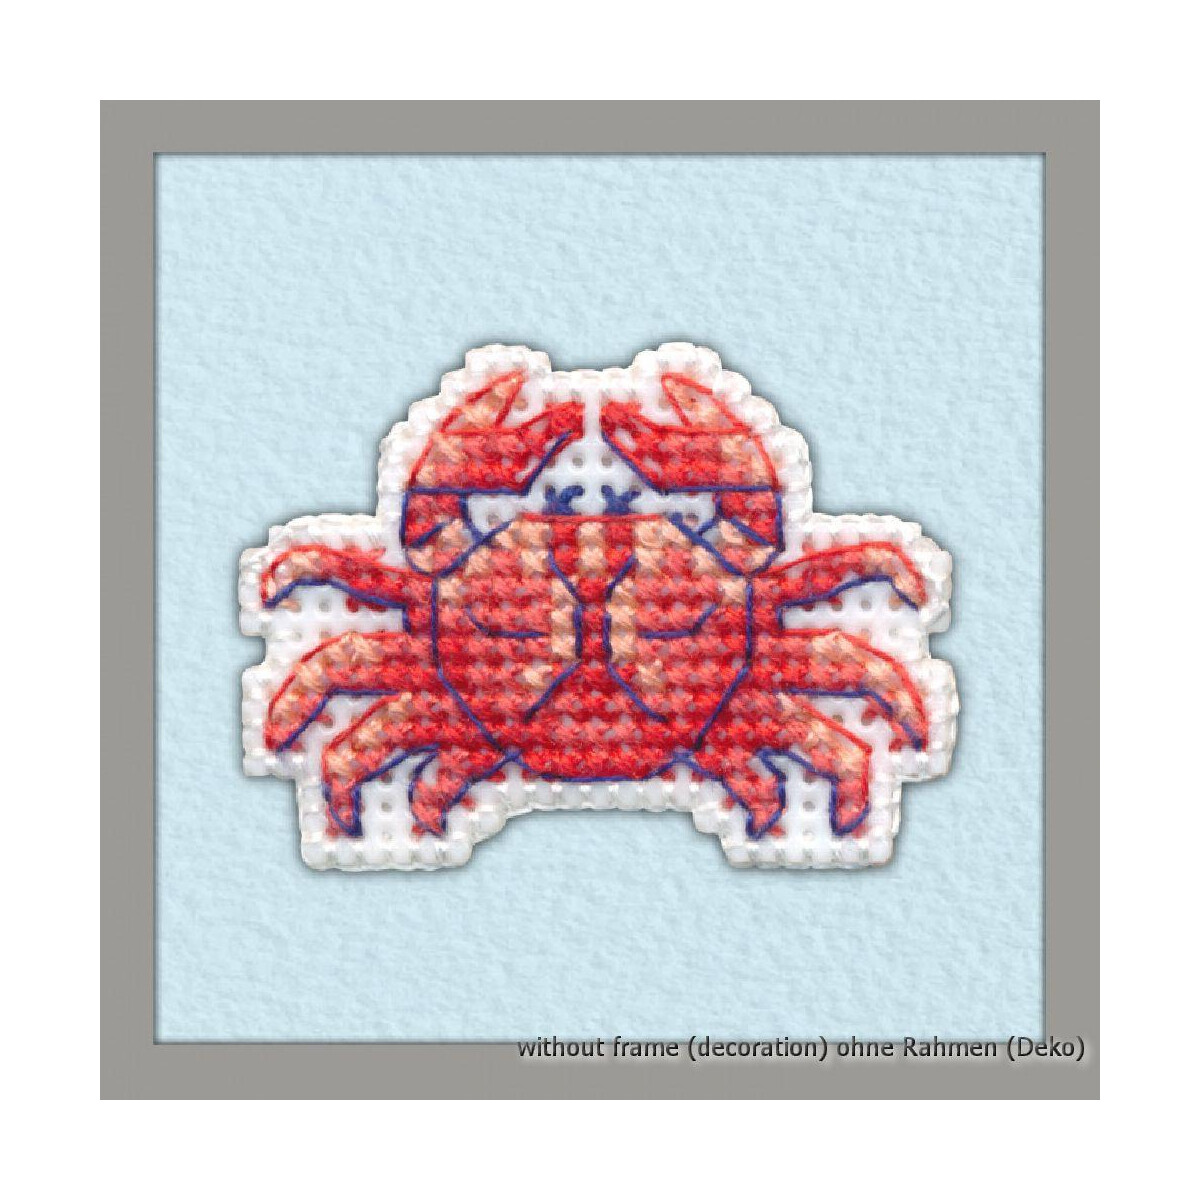 Oven counted cross stitch kit "Badge. crab",...